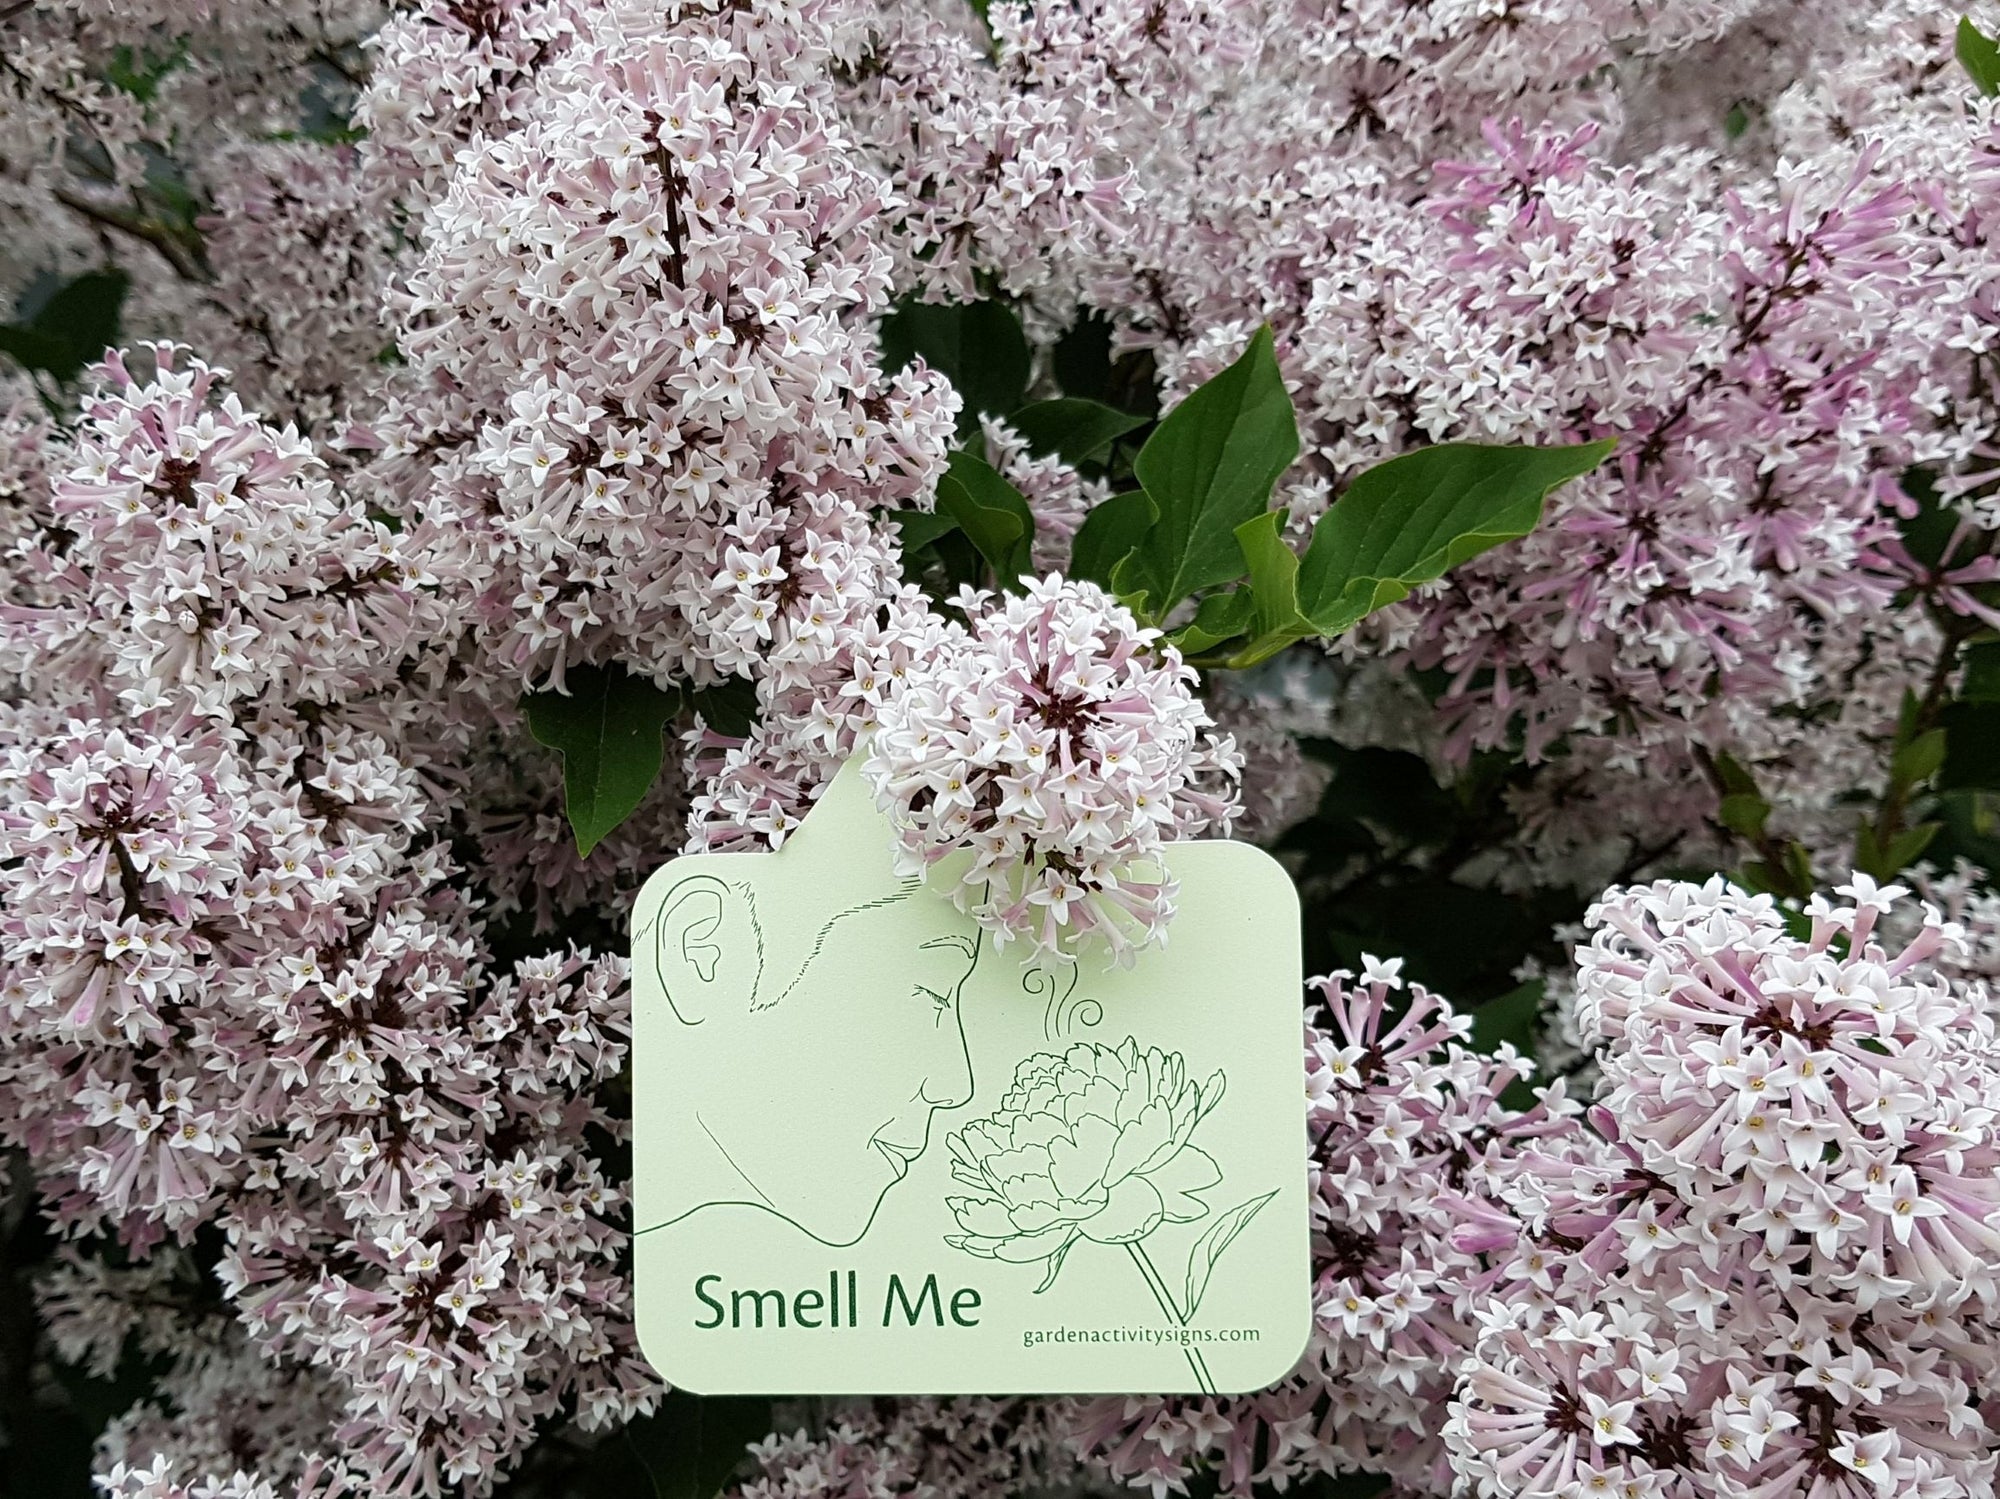 Sensory garden illustrated plant tags, set of 6 includes listen for me, look closely, look up, rub and sniff, smell me and touch me